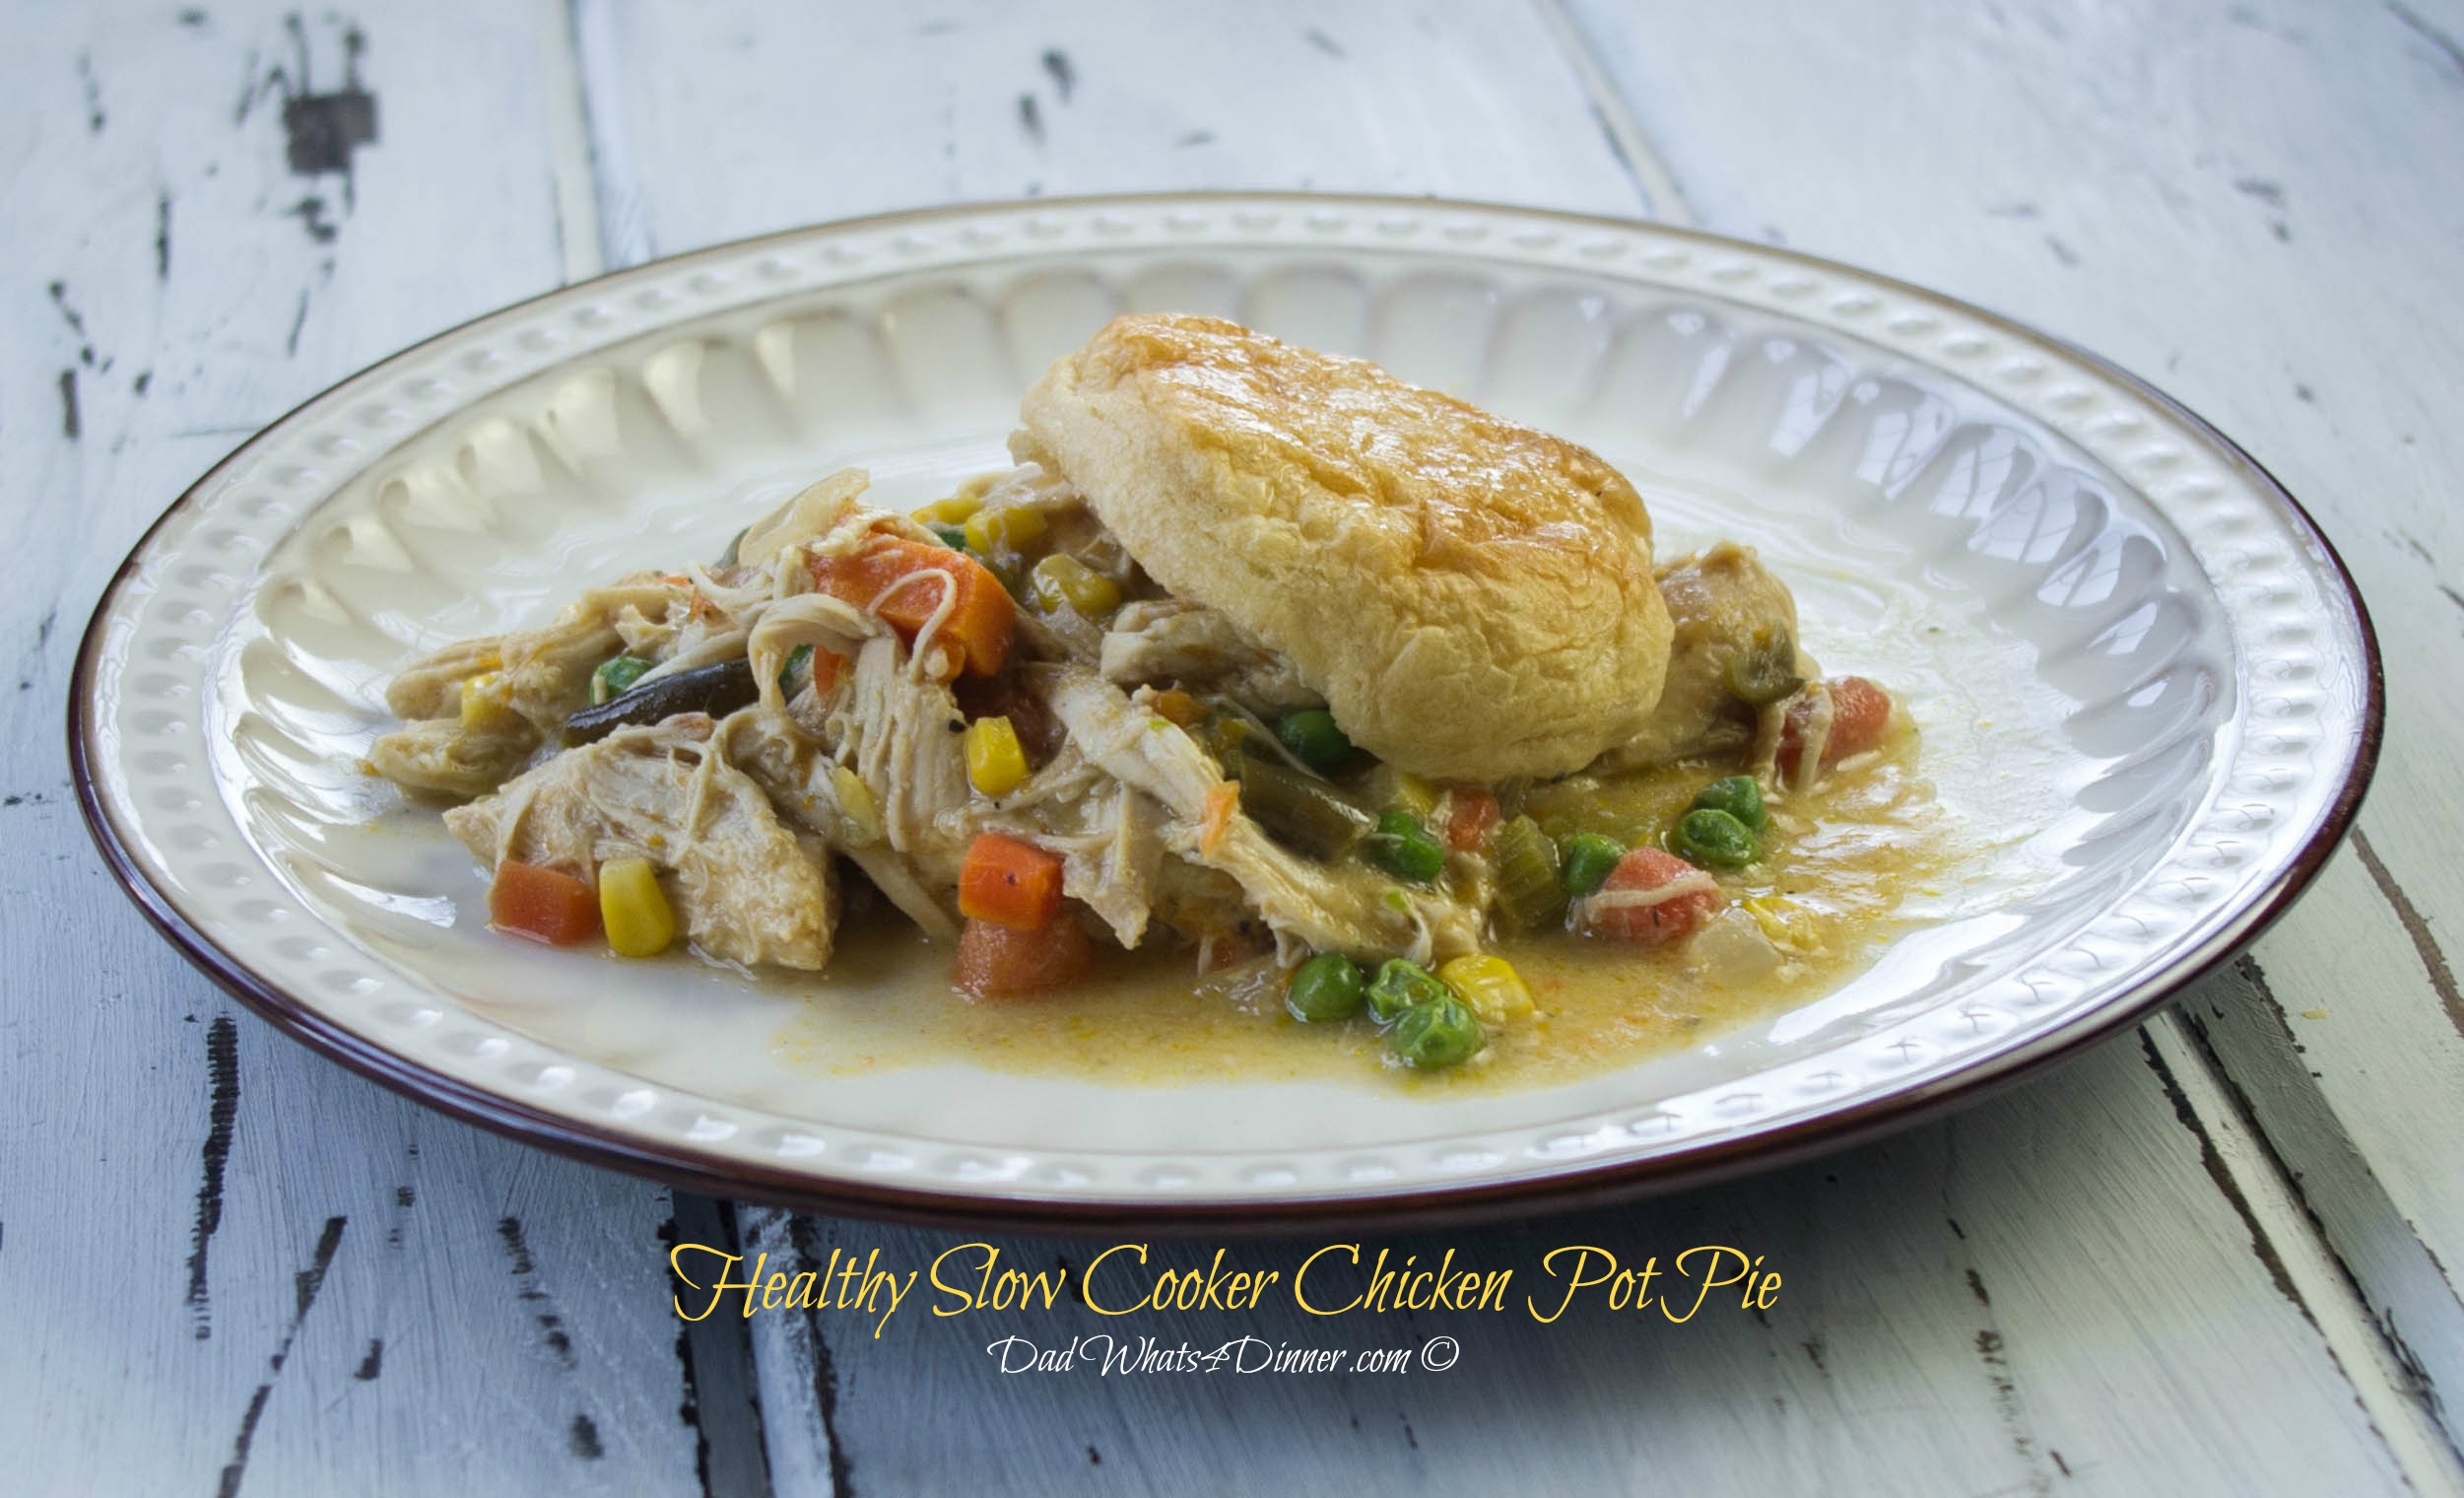 My Healthy Slow Cooker Chicken Pot Pie is a healthier slow cooker version of the comfort food classic. Easy to make with a healthy twist.